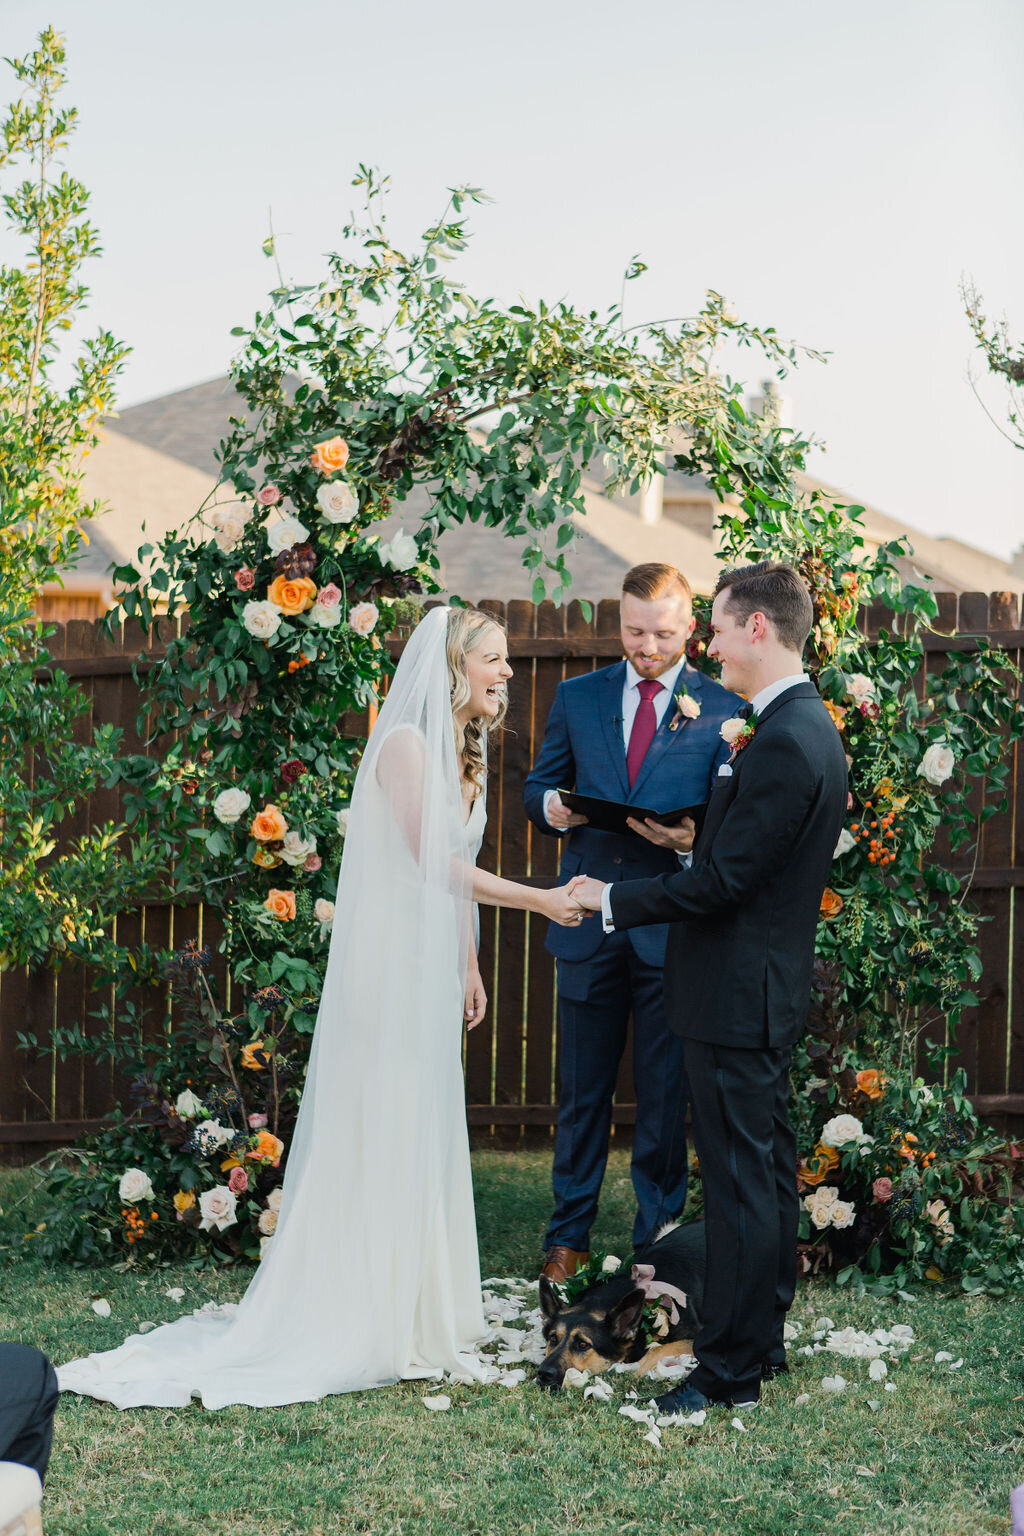 Backyard Wedding Ceremony  in Fort Worth with Floral Arch by Vella Nest Floral Design